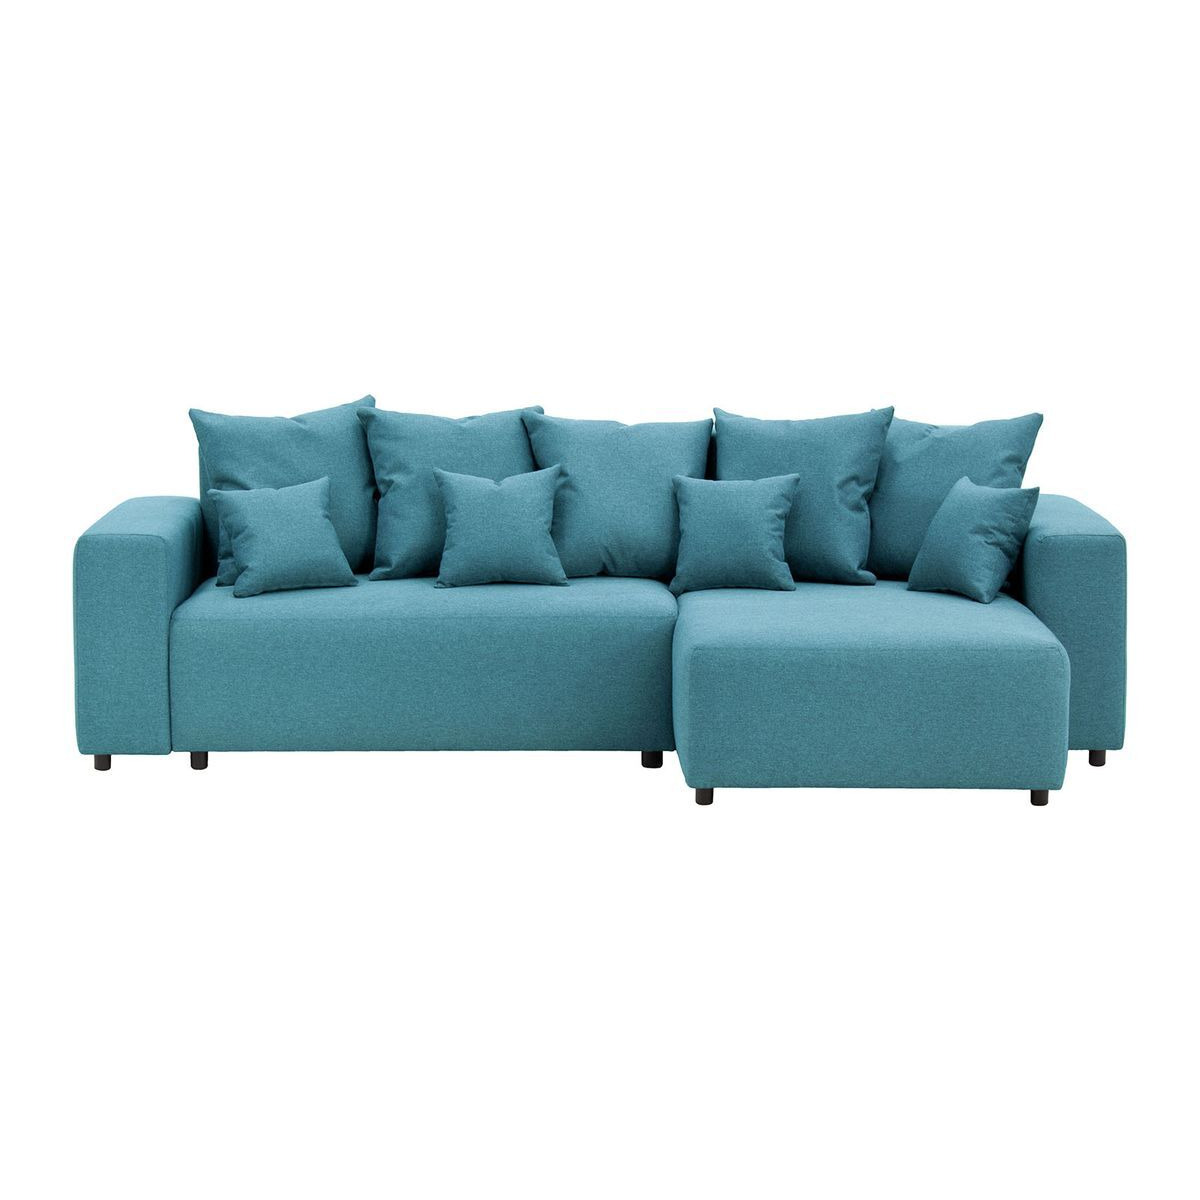 Homely Right Hand Corner Sofa Bed, turquoise - image 1